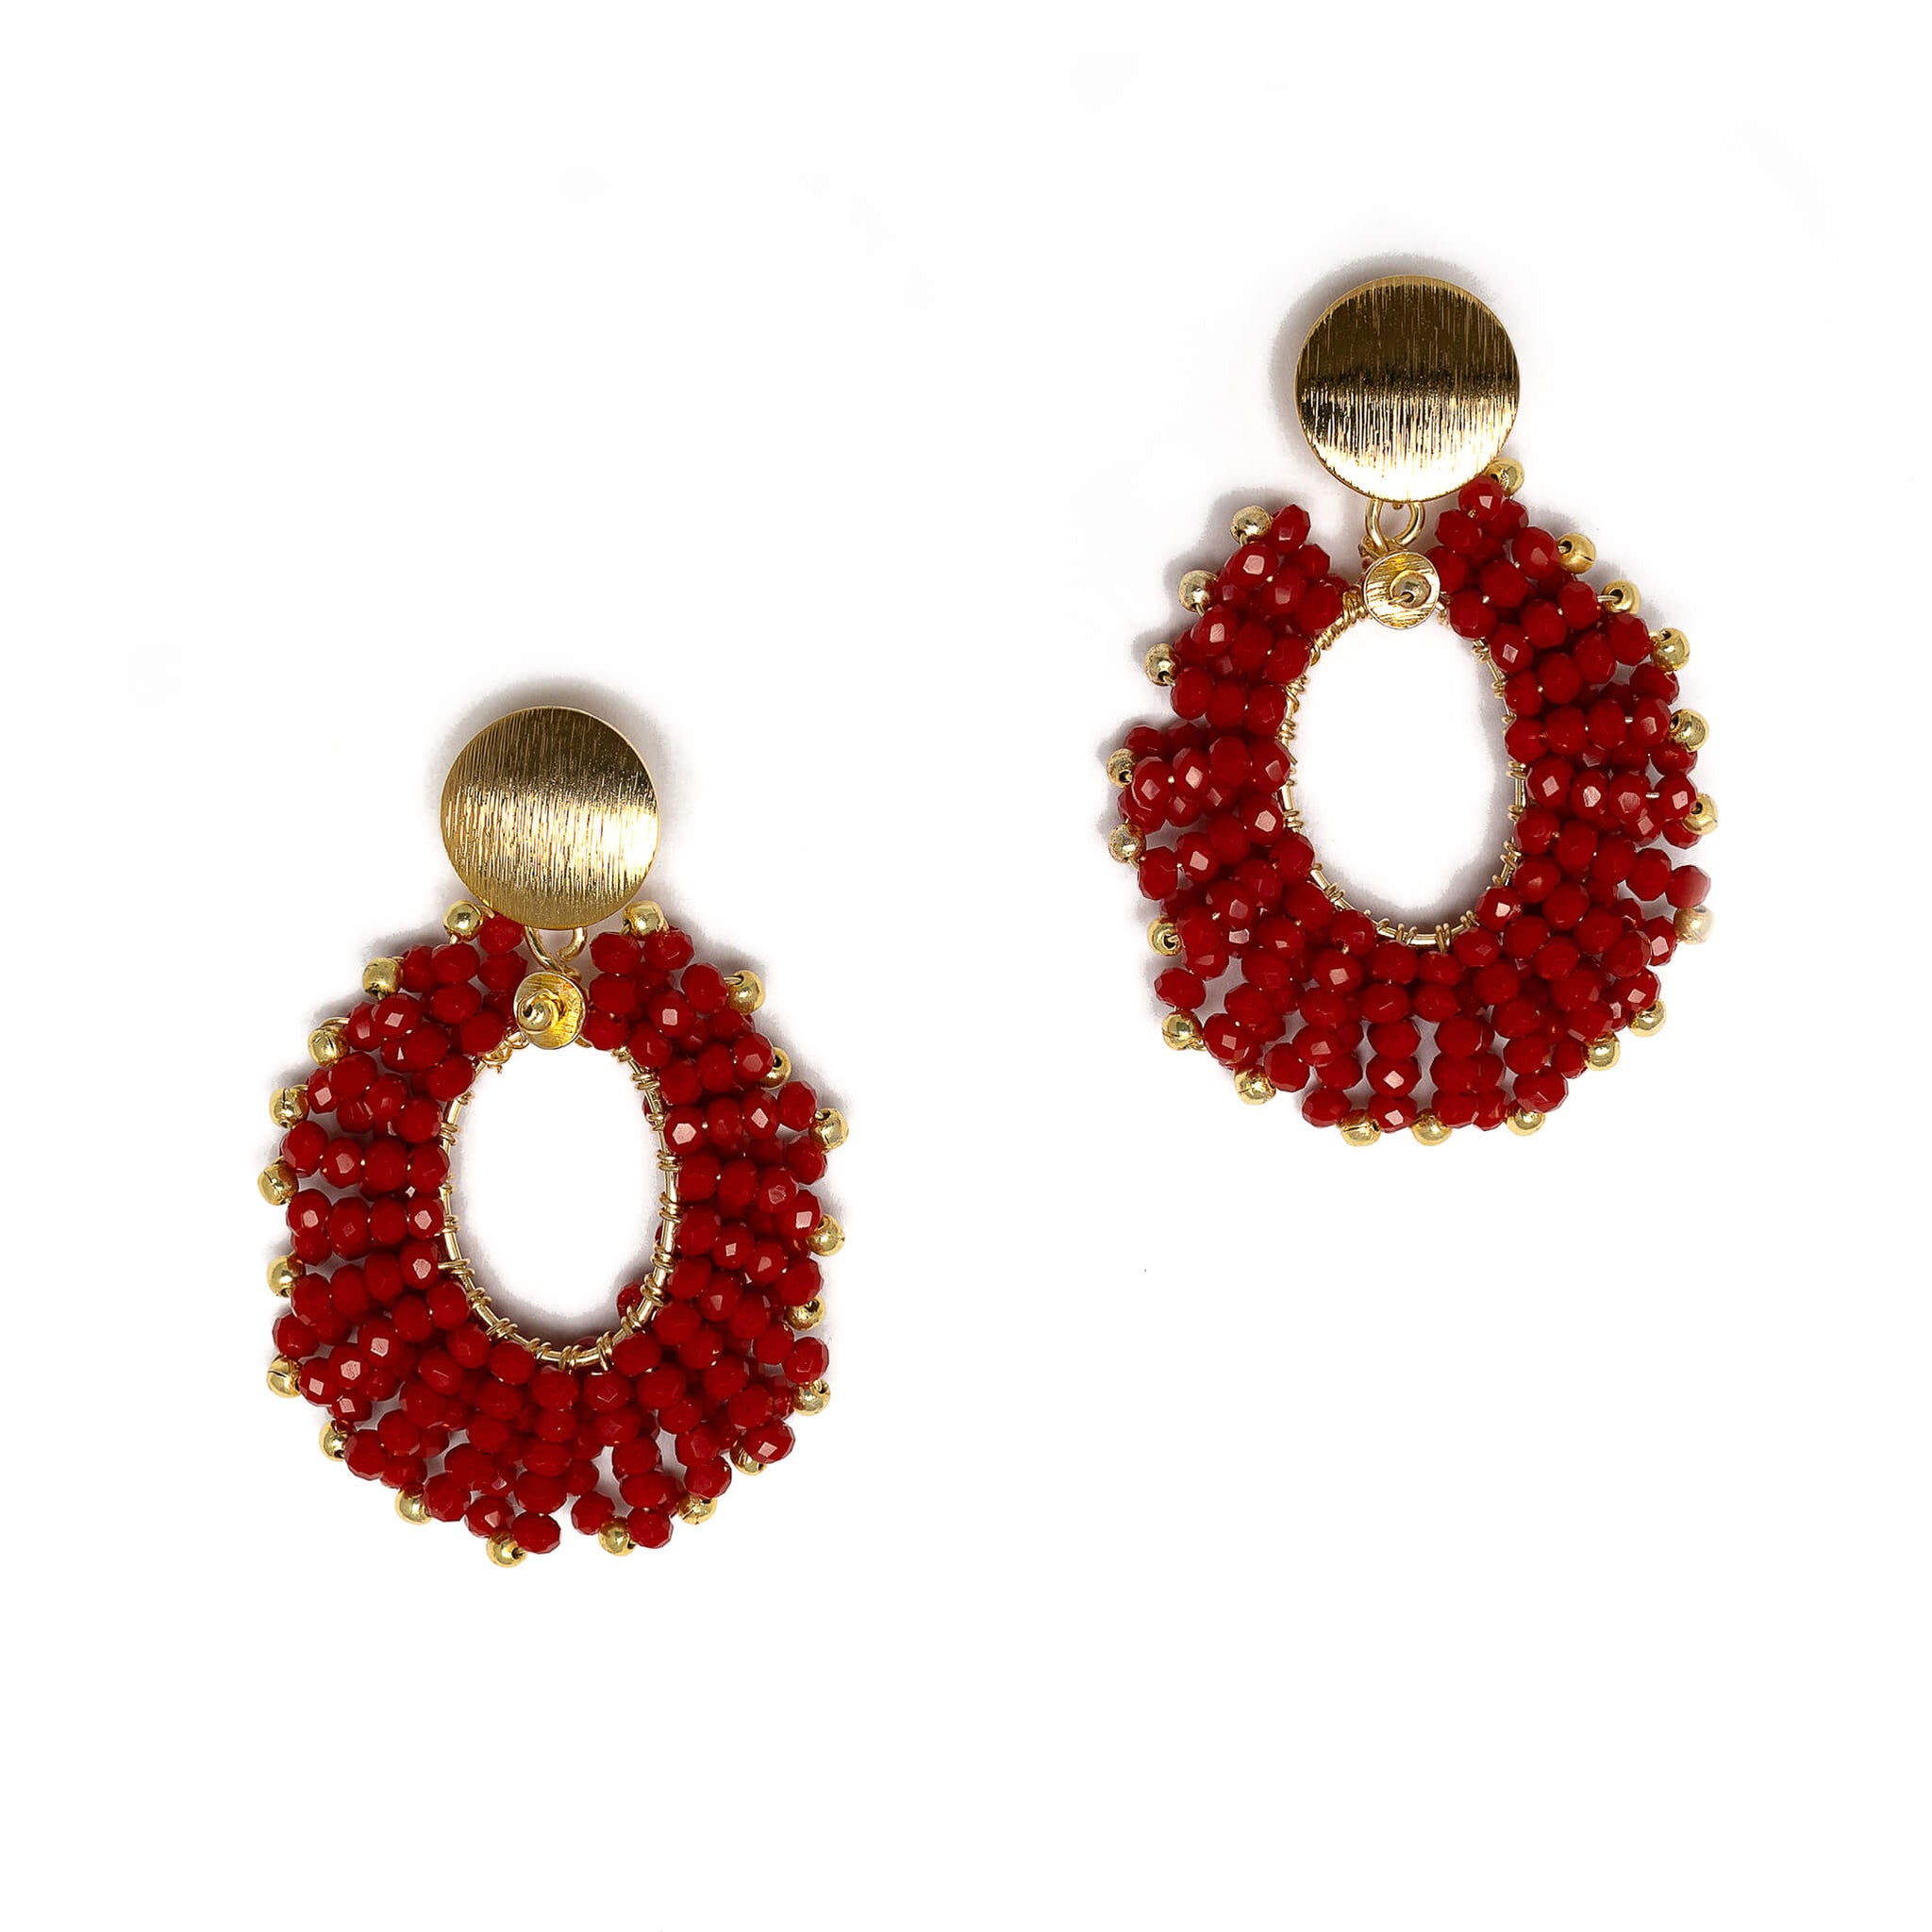 The Lyon earrings are 1.75 inches long. Gold and red earrings. Handmade with non-tarnish gold plated wire and Czech seed bead crystals. Dangle Earrings. Oval shape earrings.